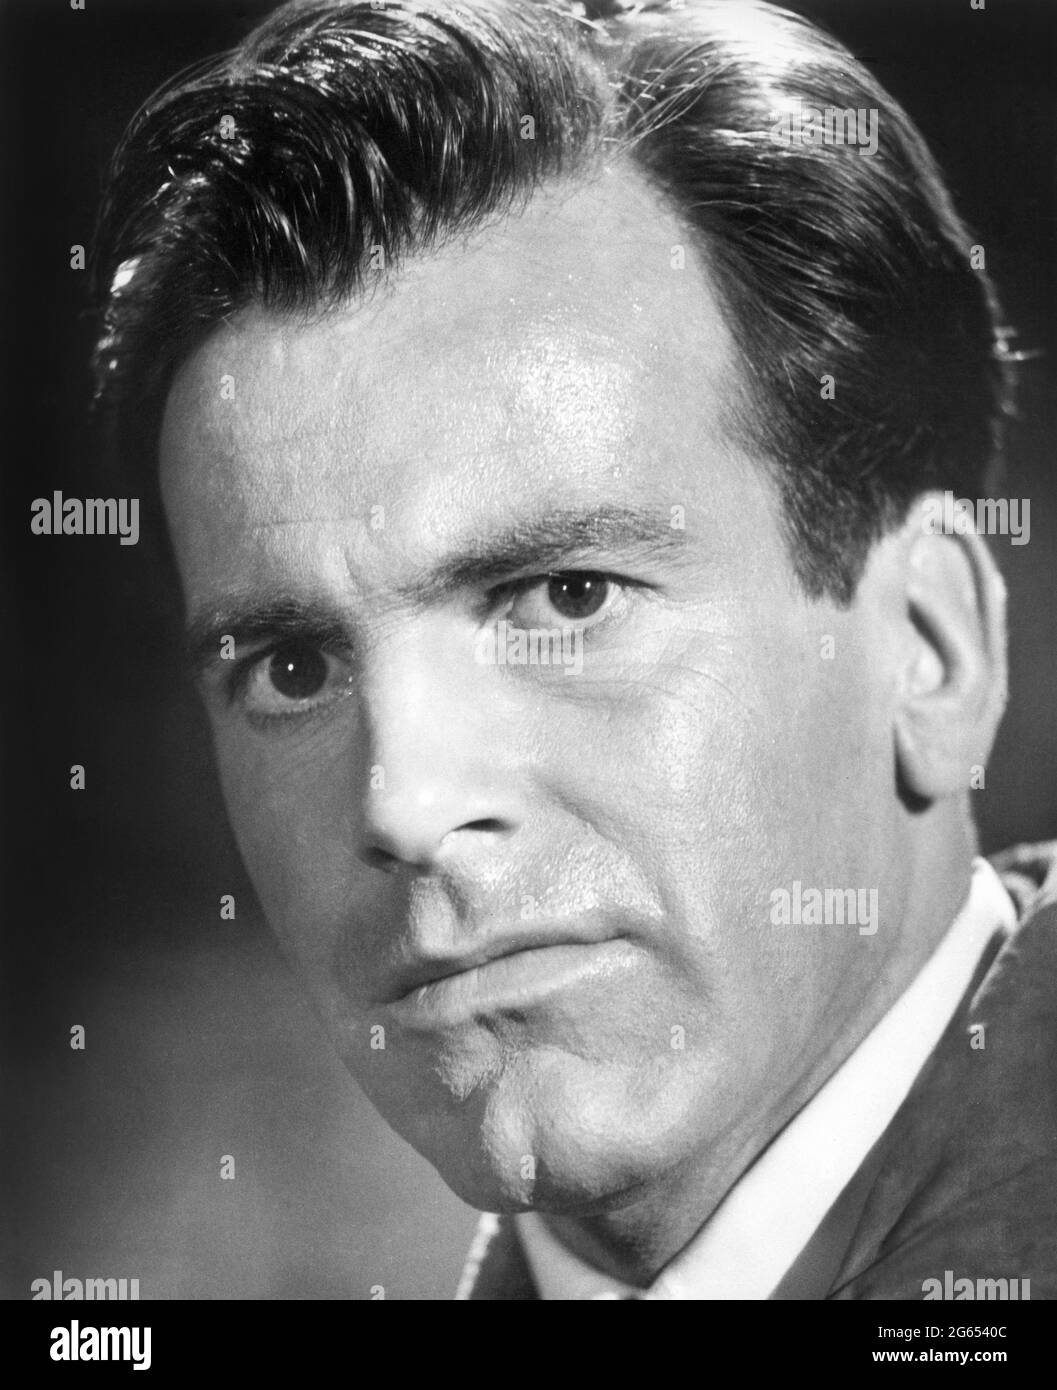 Maximilian Schell, Head and Shoulders Publicity Portrait for the British Film, 'Return From The Ashes', United Artists, 1965 Stock Photo